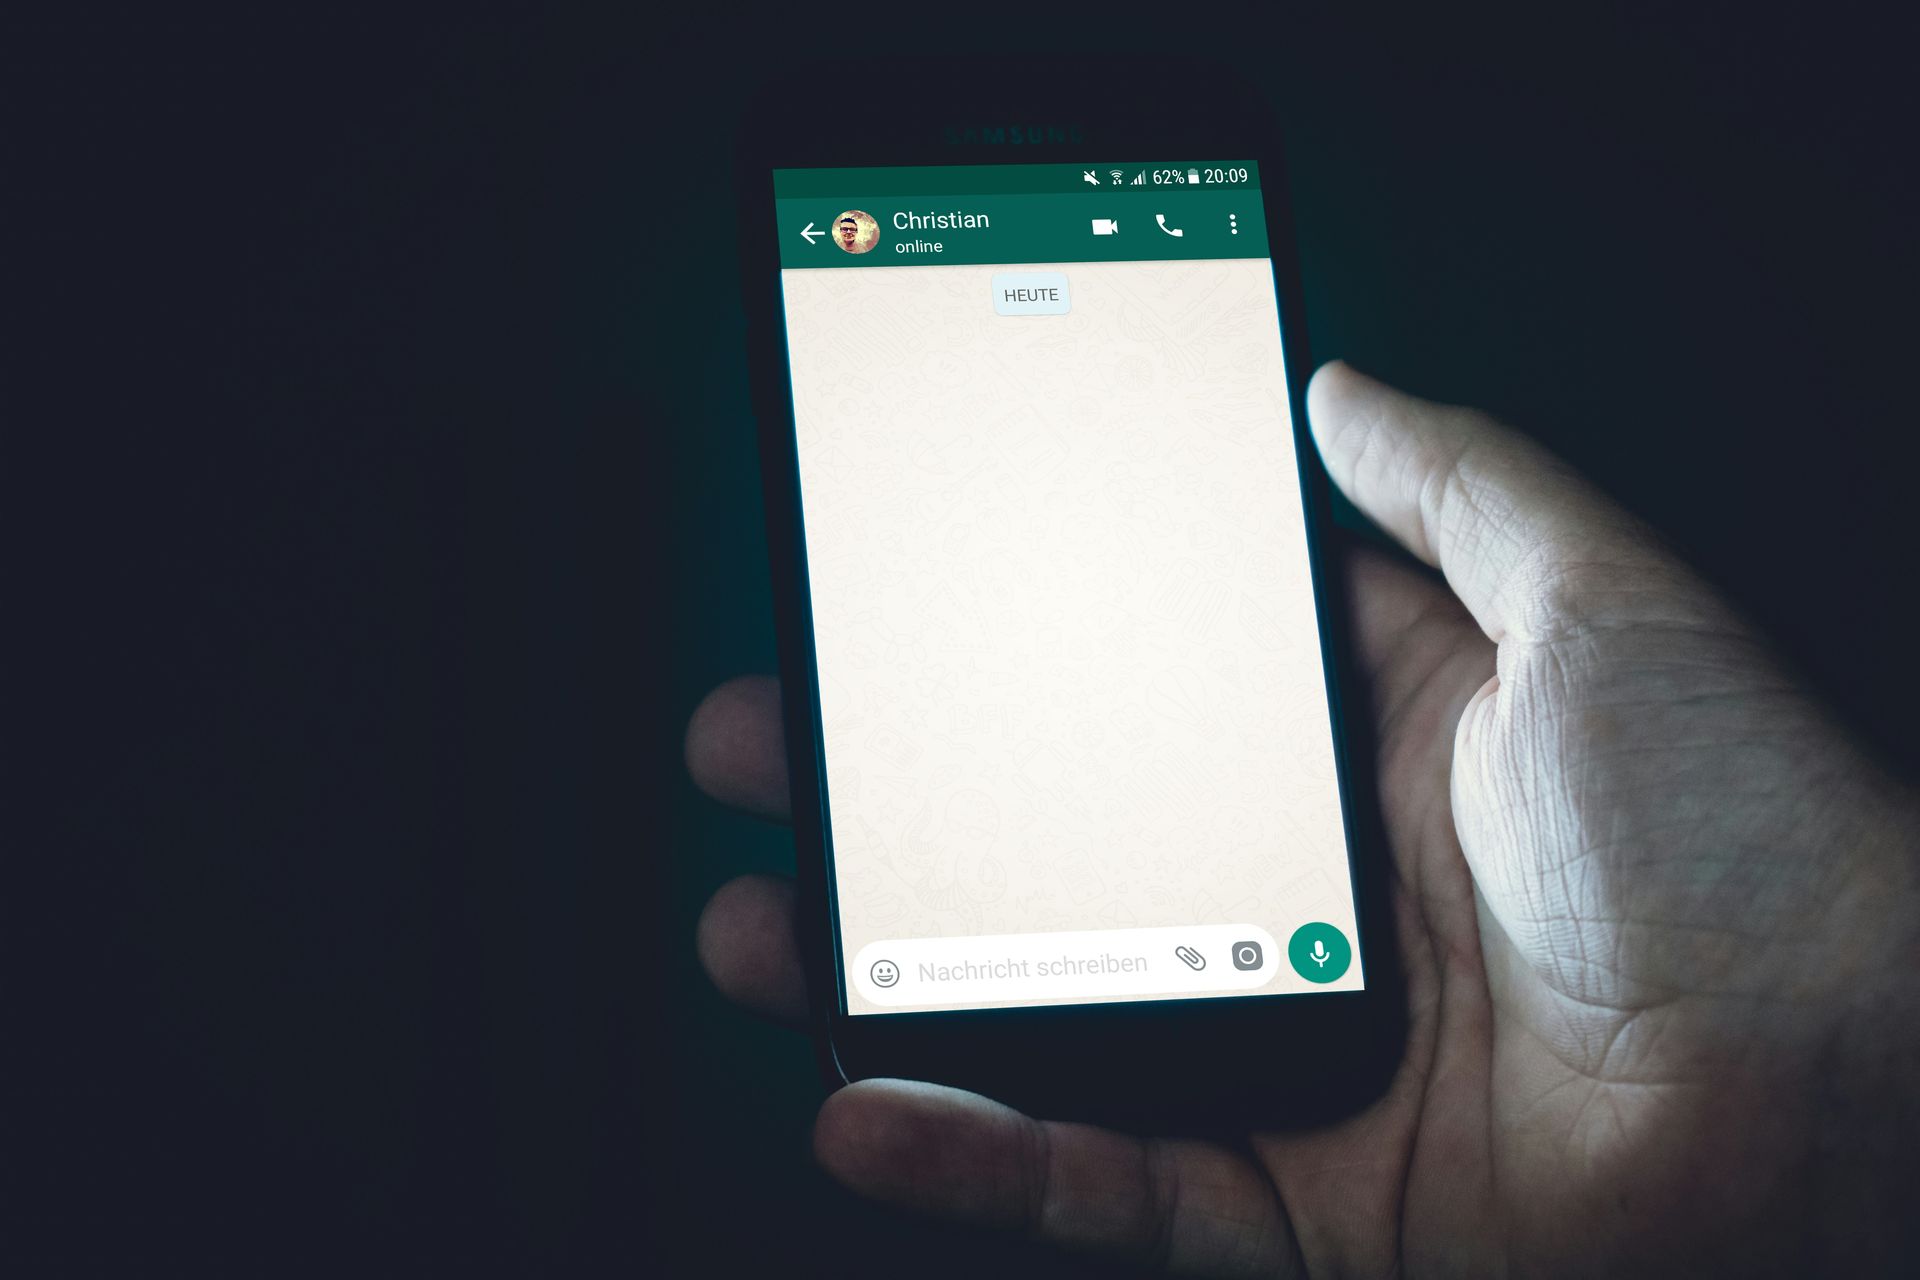 WhatsApp allows pinning multiple messages in chats